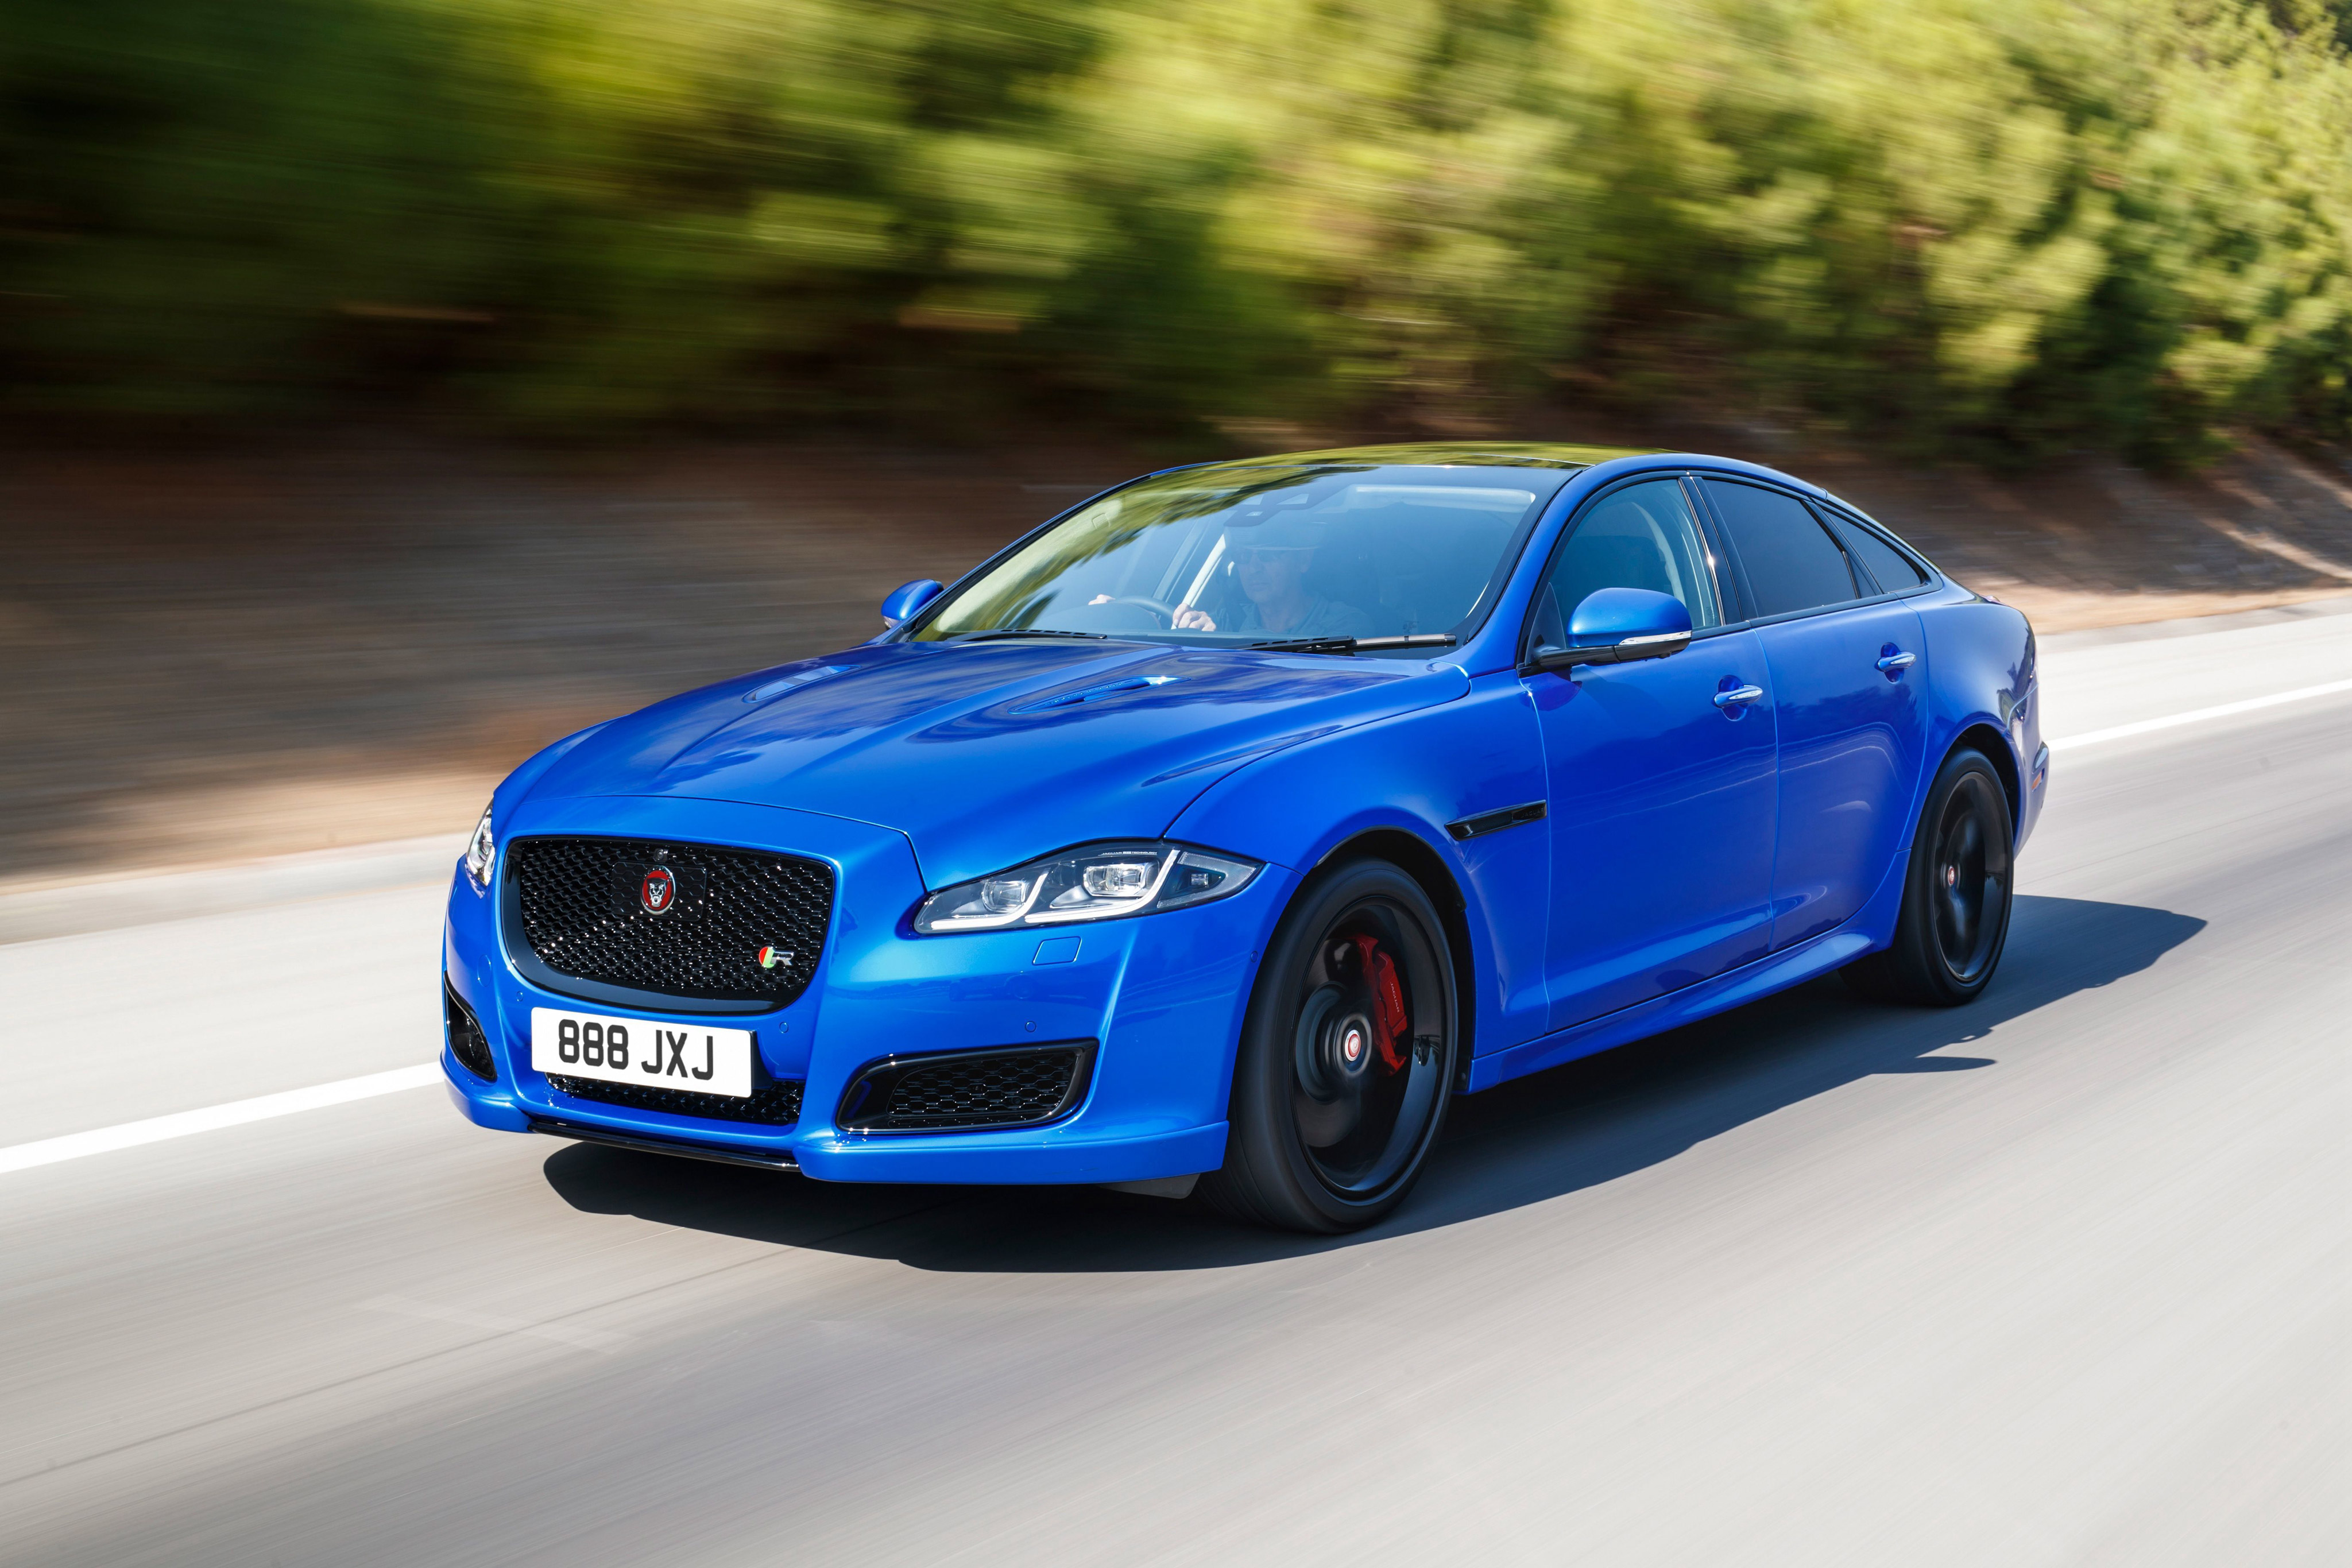 Jaguar XJR575 2017 4k, HD Cars, 4k Wallpapers, Images, Backgrounds, Photos and Pictures